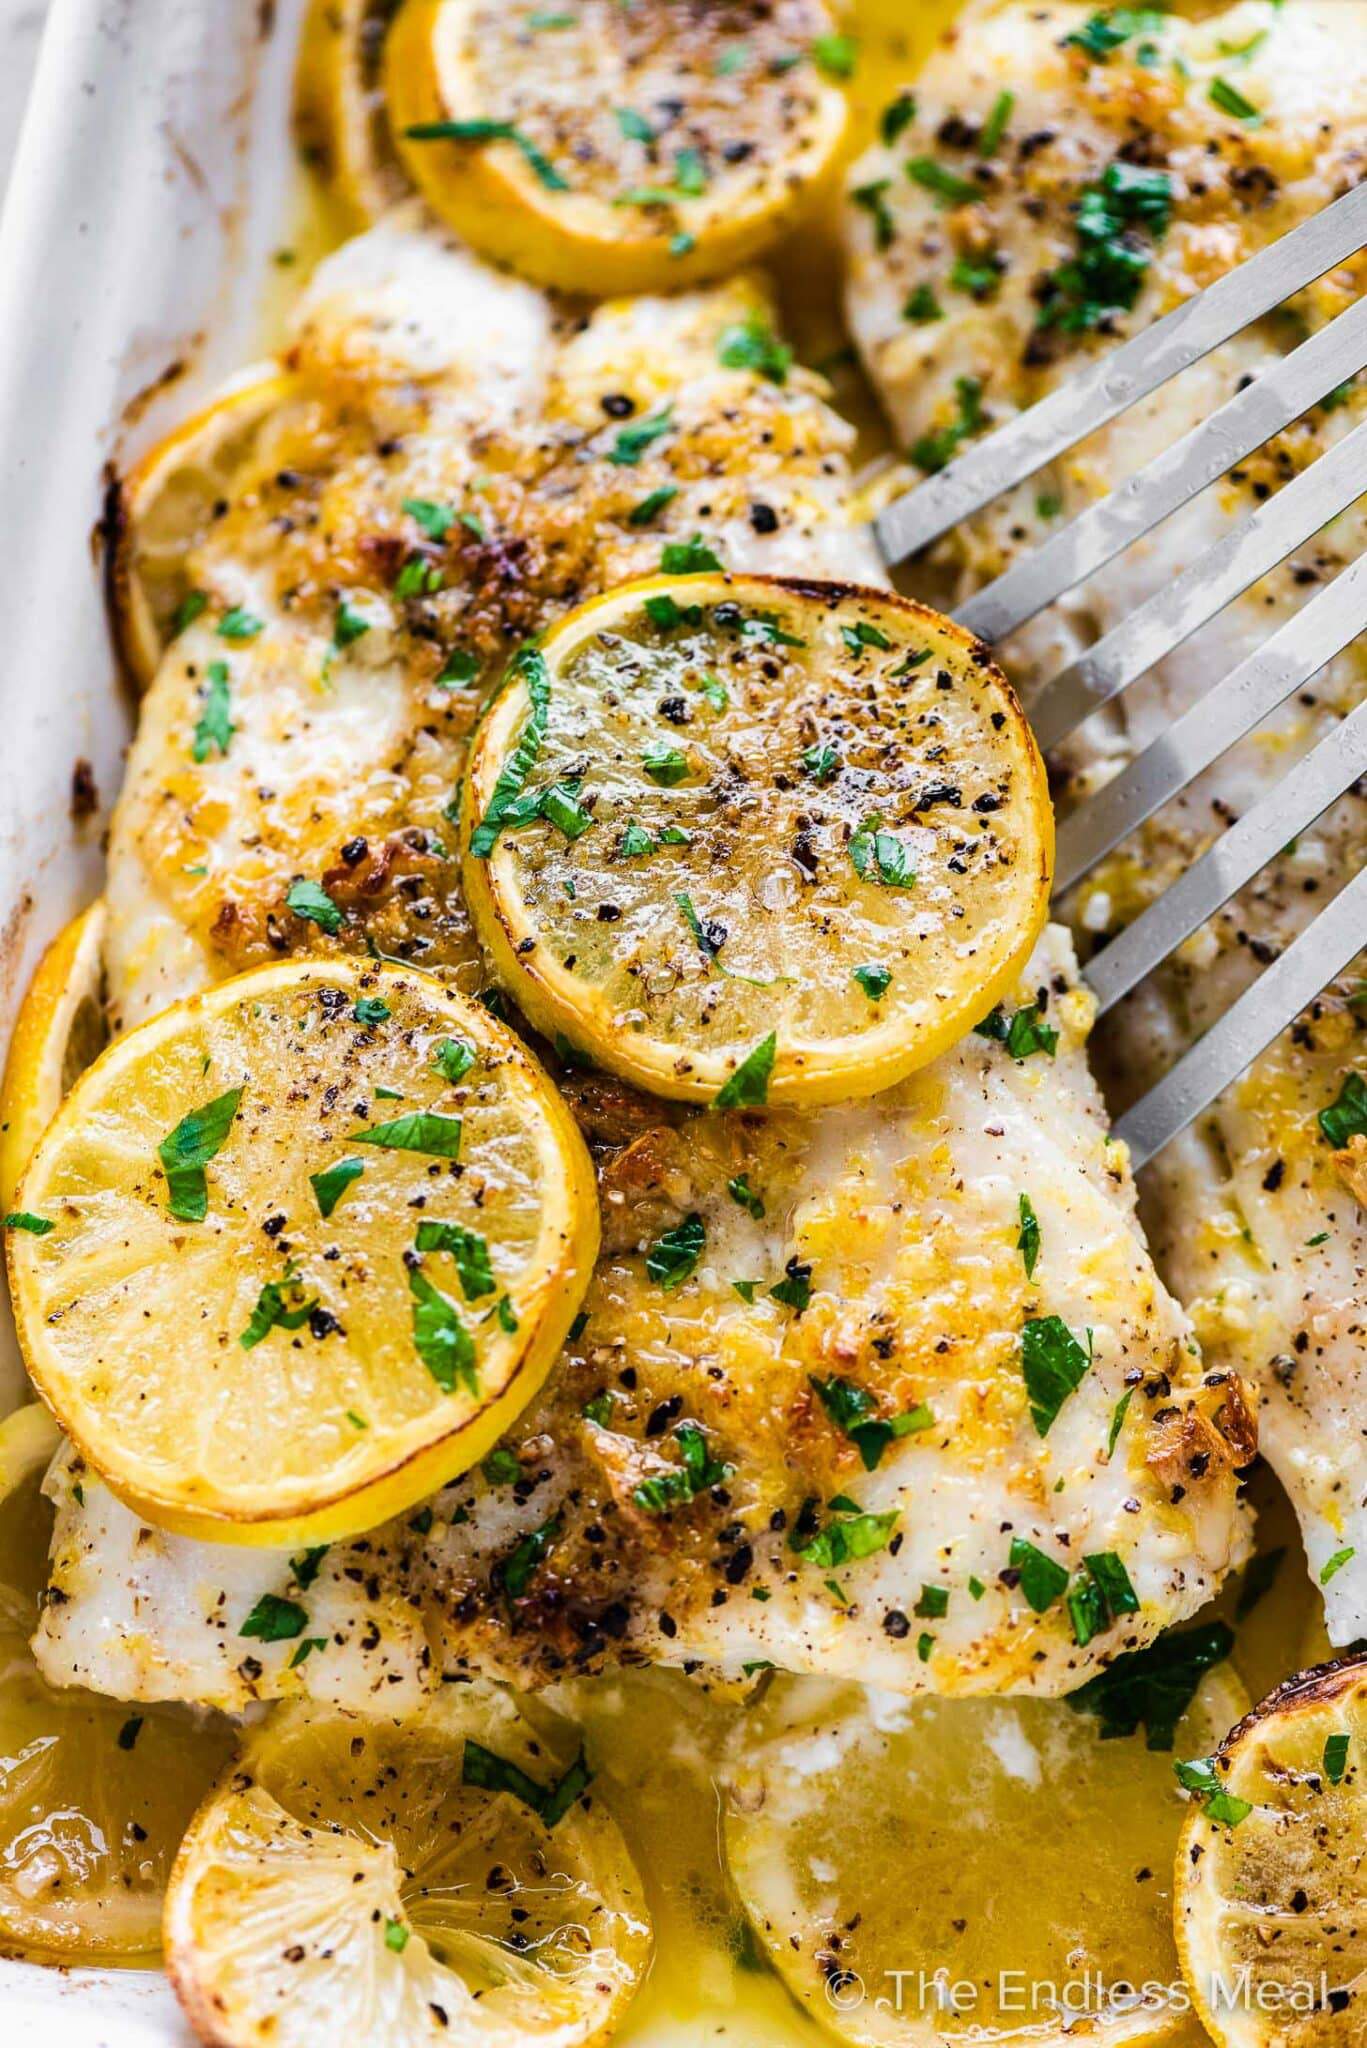 A spatula lifting a piece of baked fish with lemons out of a baking dish.